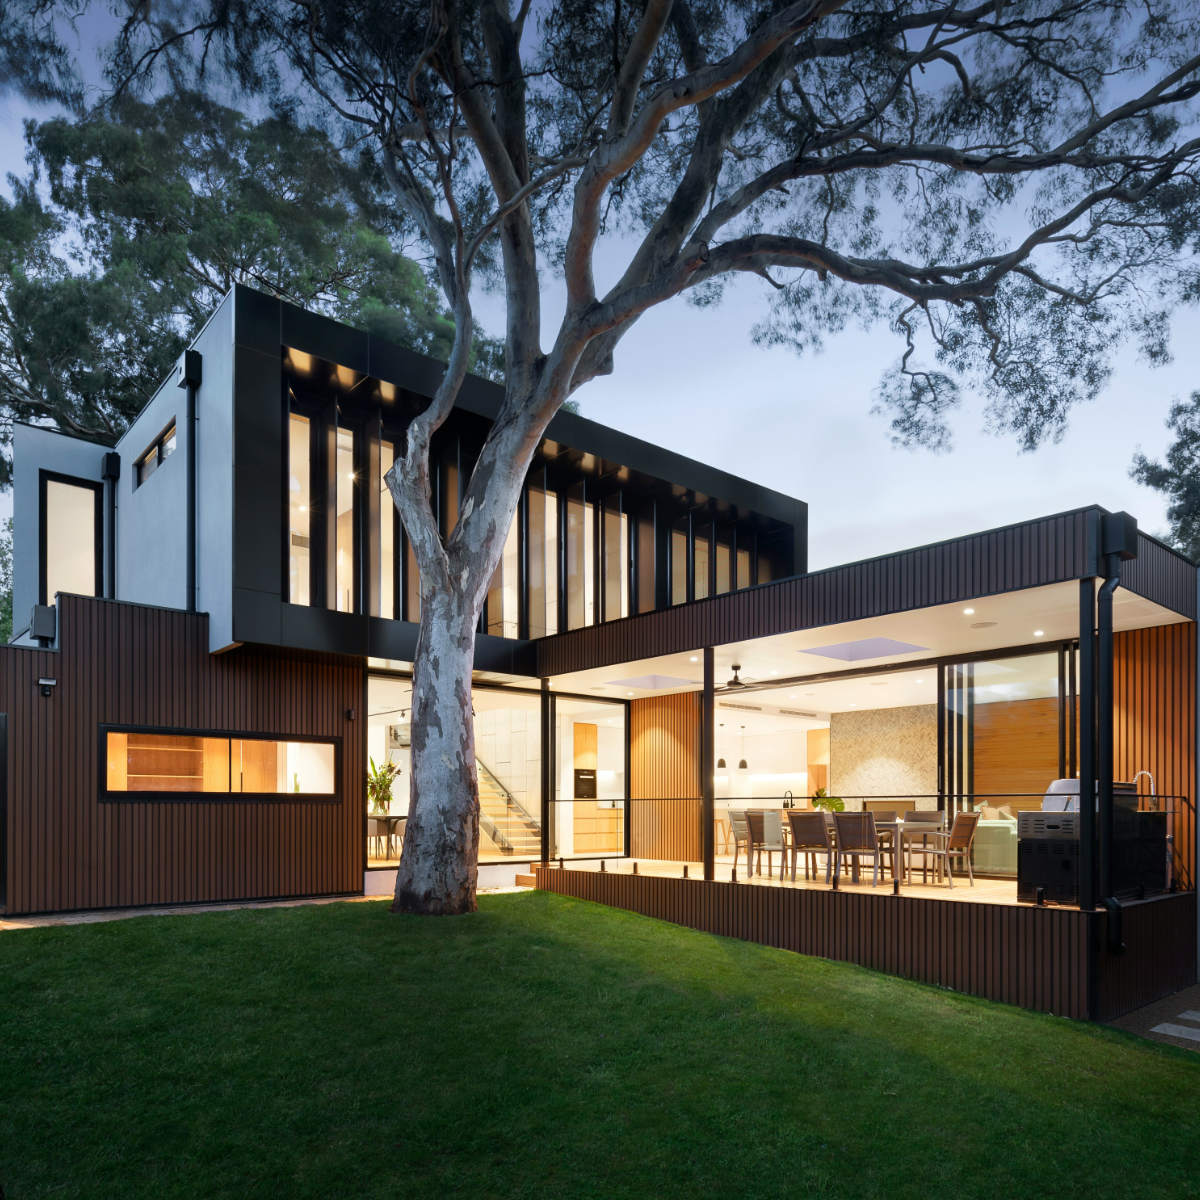 exterior image of nicely lit home